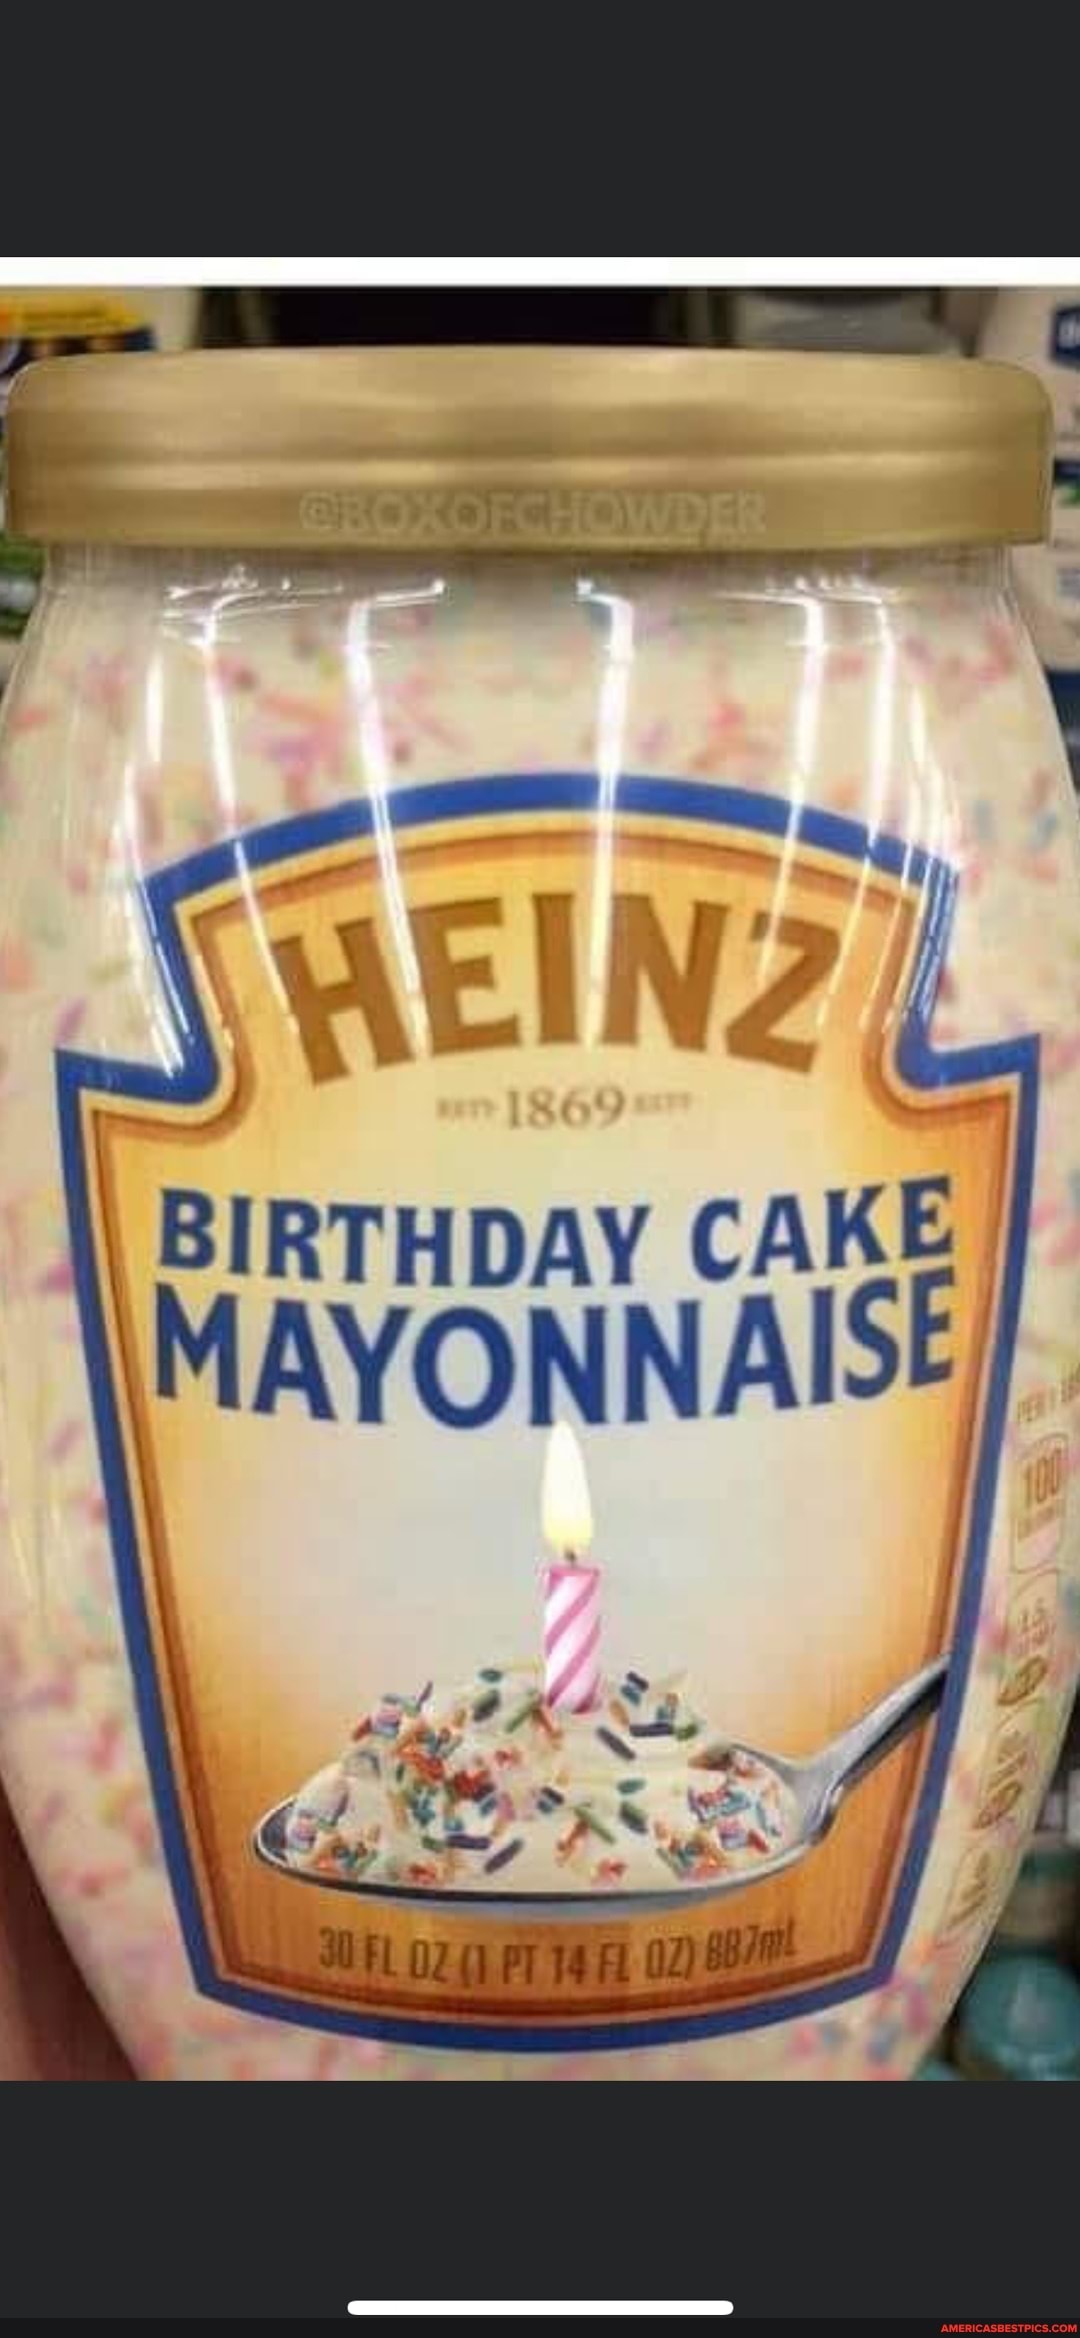 BIRTHDAY CAKE MAYONNAISE - America's best pics and videos